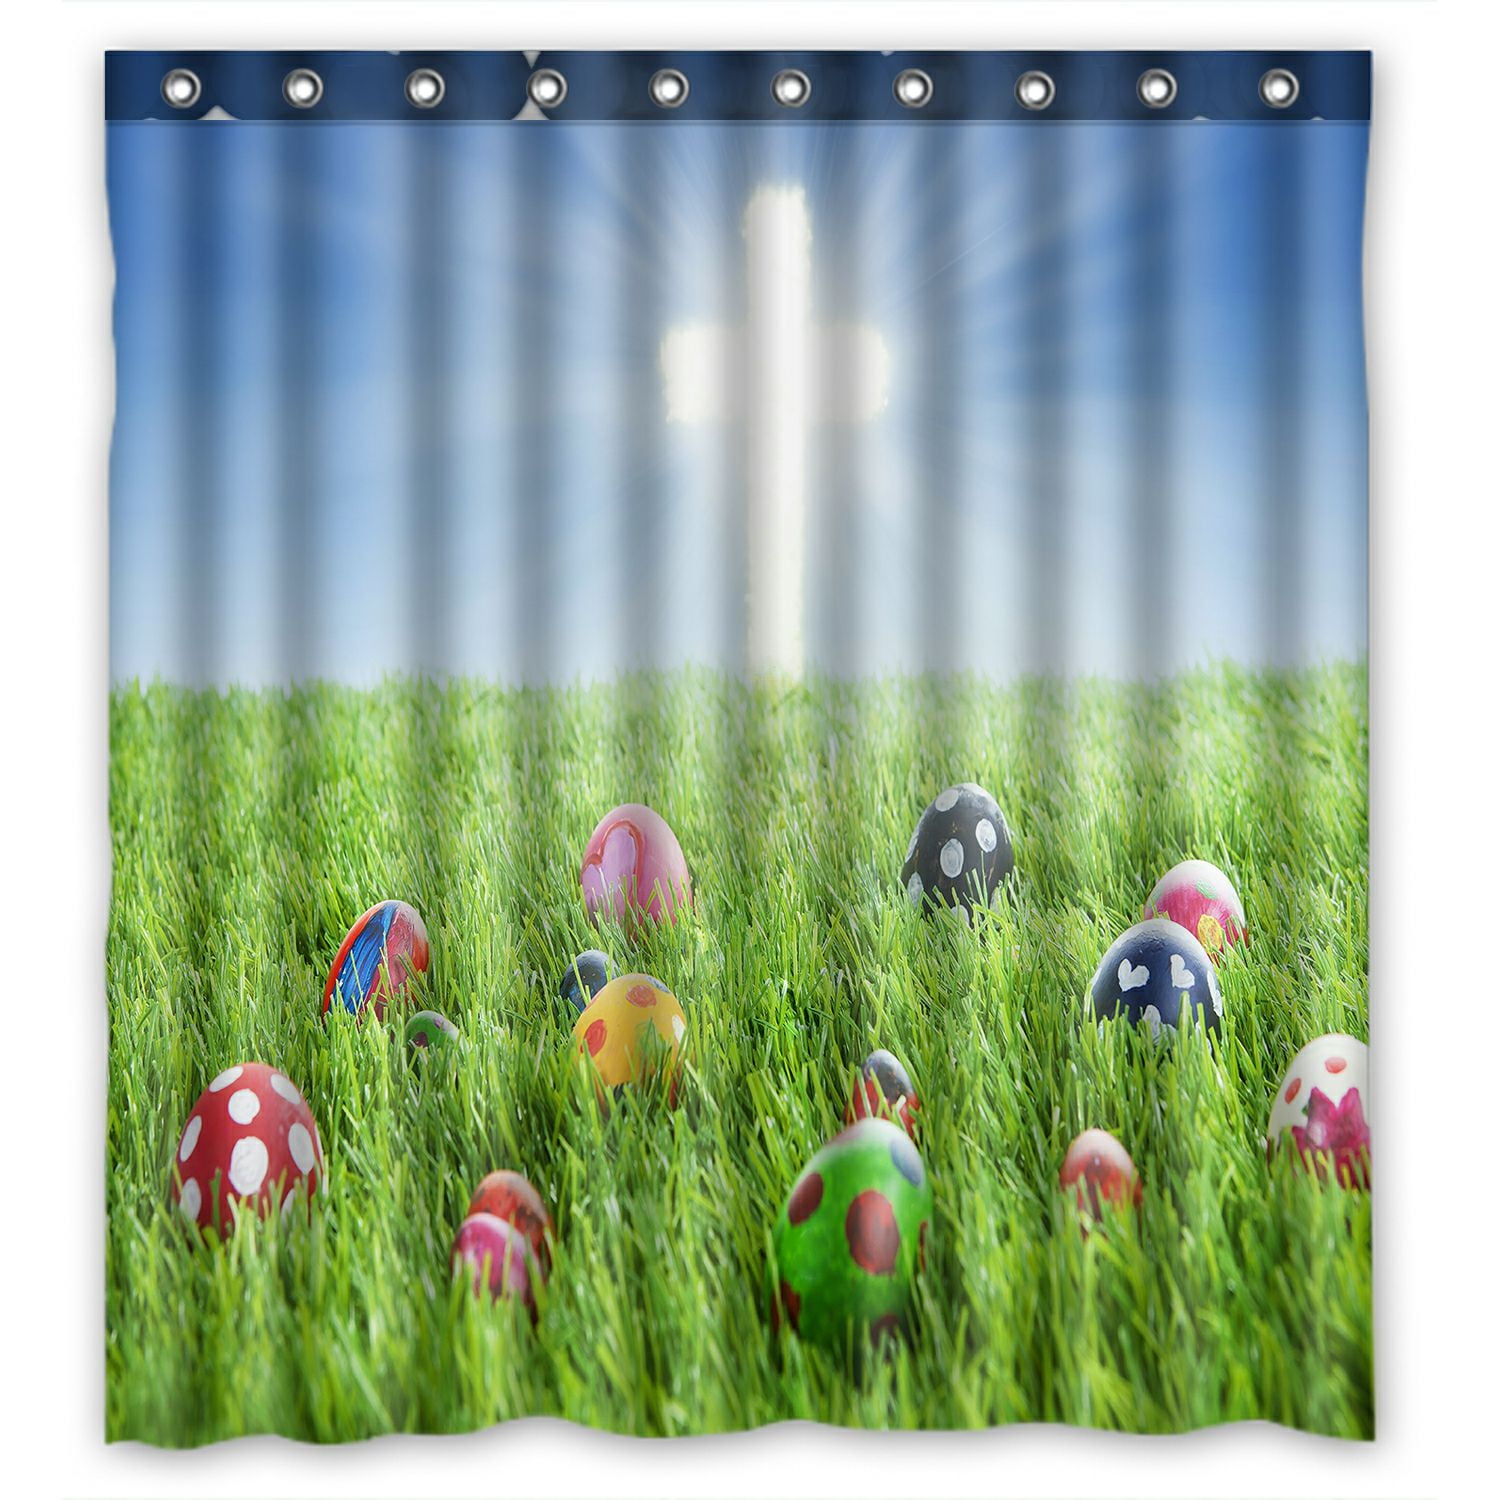 Green Grass Colorful Easter Eggs Bright Cross Fabric Shower Curtain Set 72x72" 